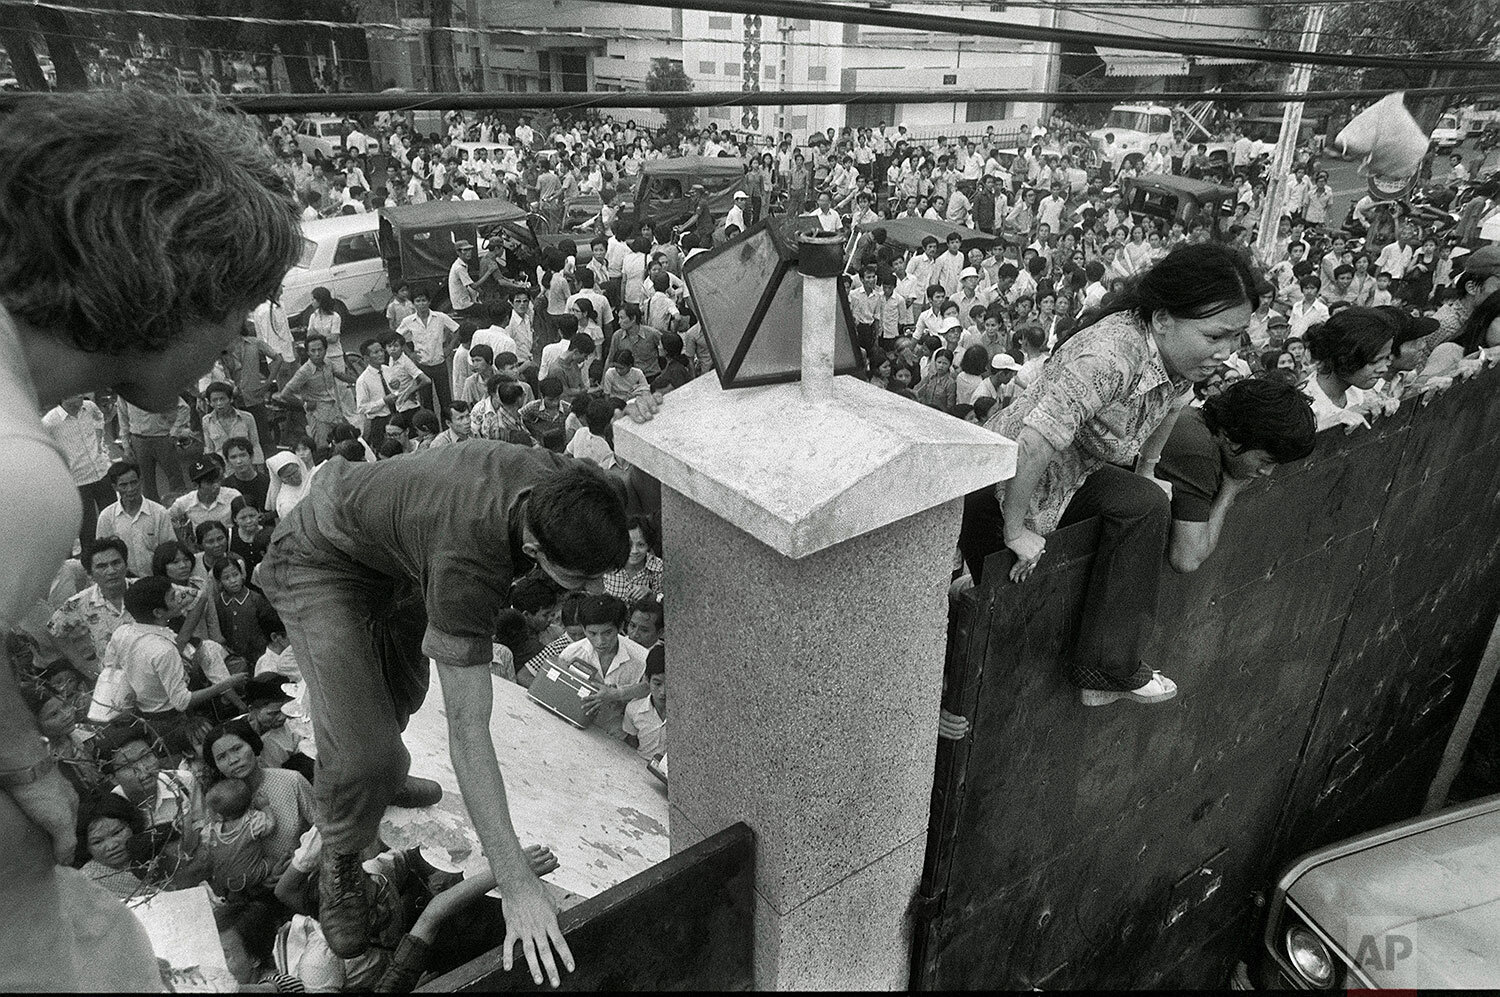  South Vietnamese civilians scale the 14-foot wall of the U.S. embassy in Saigon, trying to reach evacuation helicopters as the last Americans depart from Vietnam, April 29, 1975. (AP Photo) 